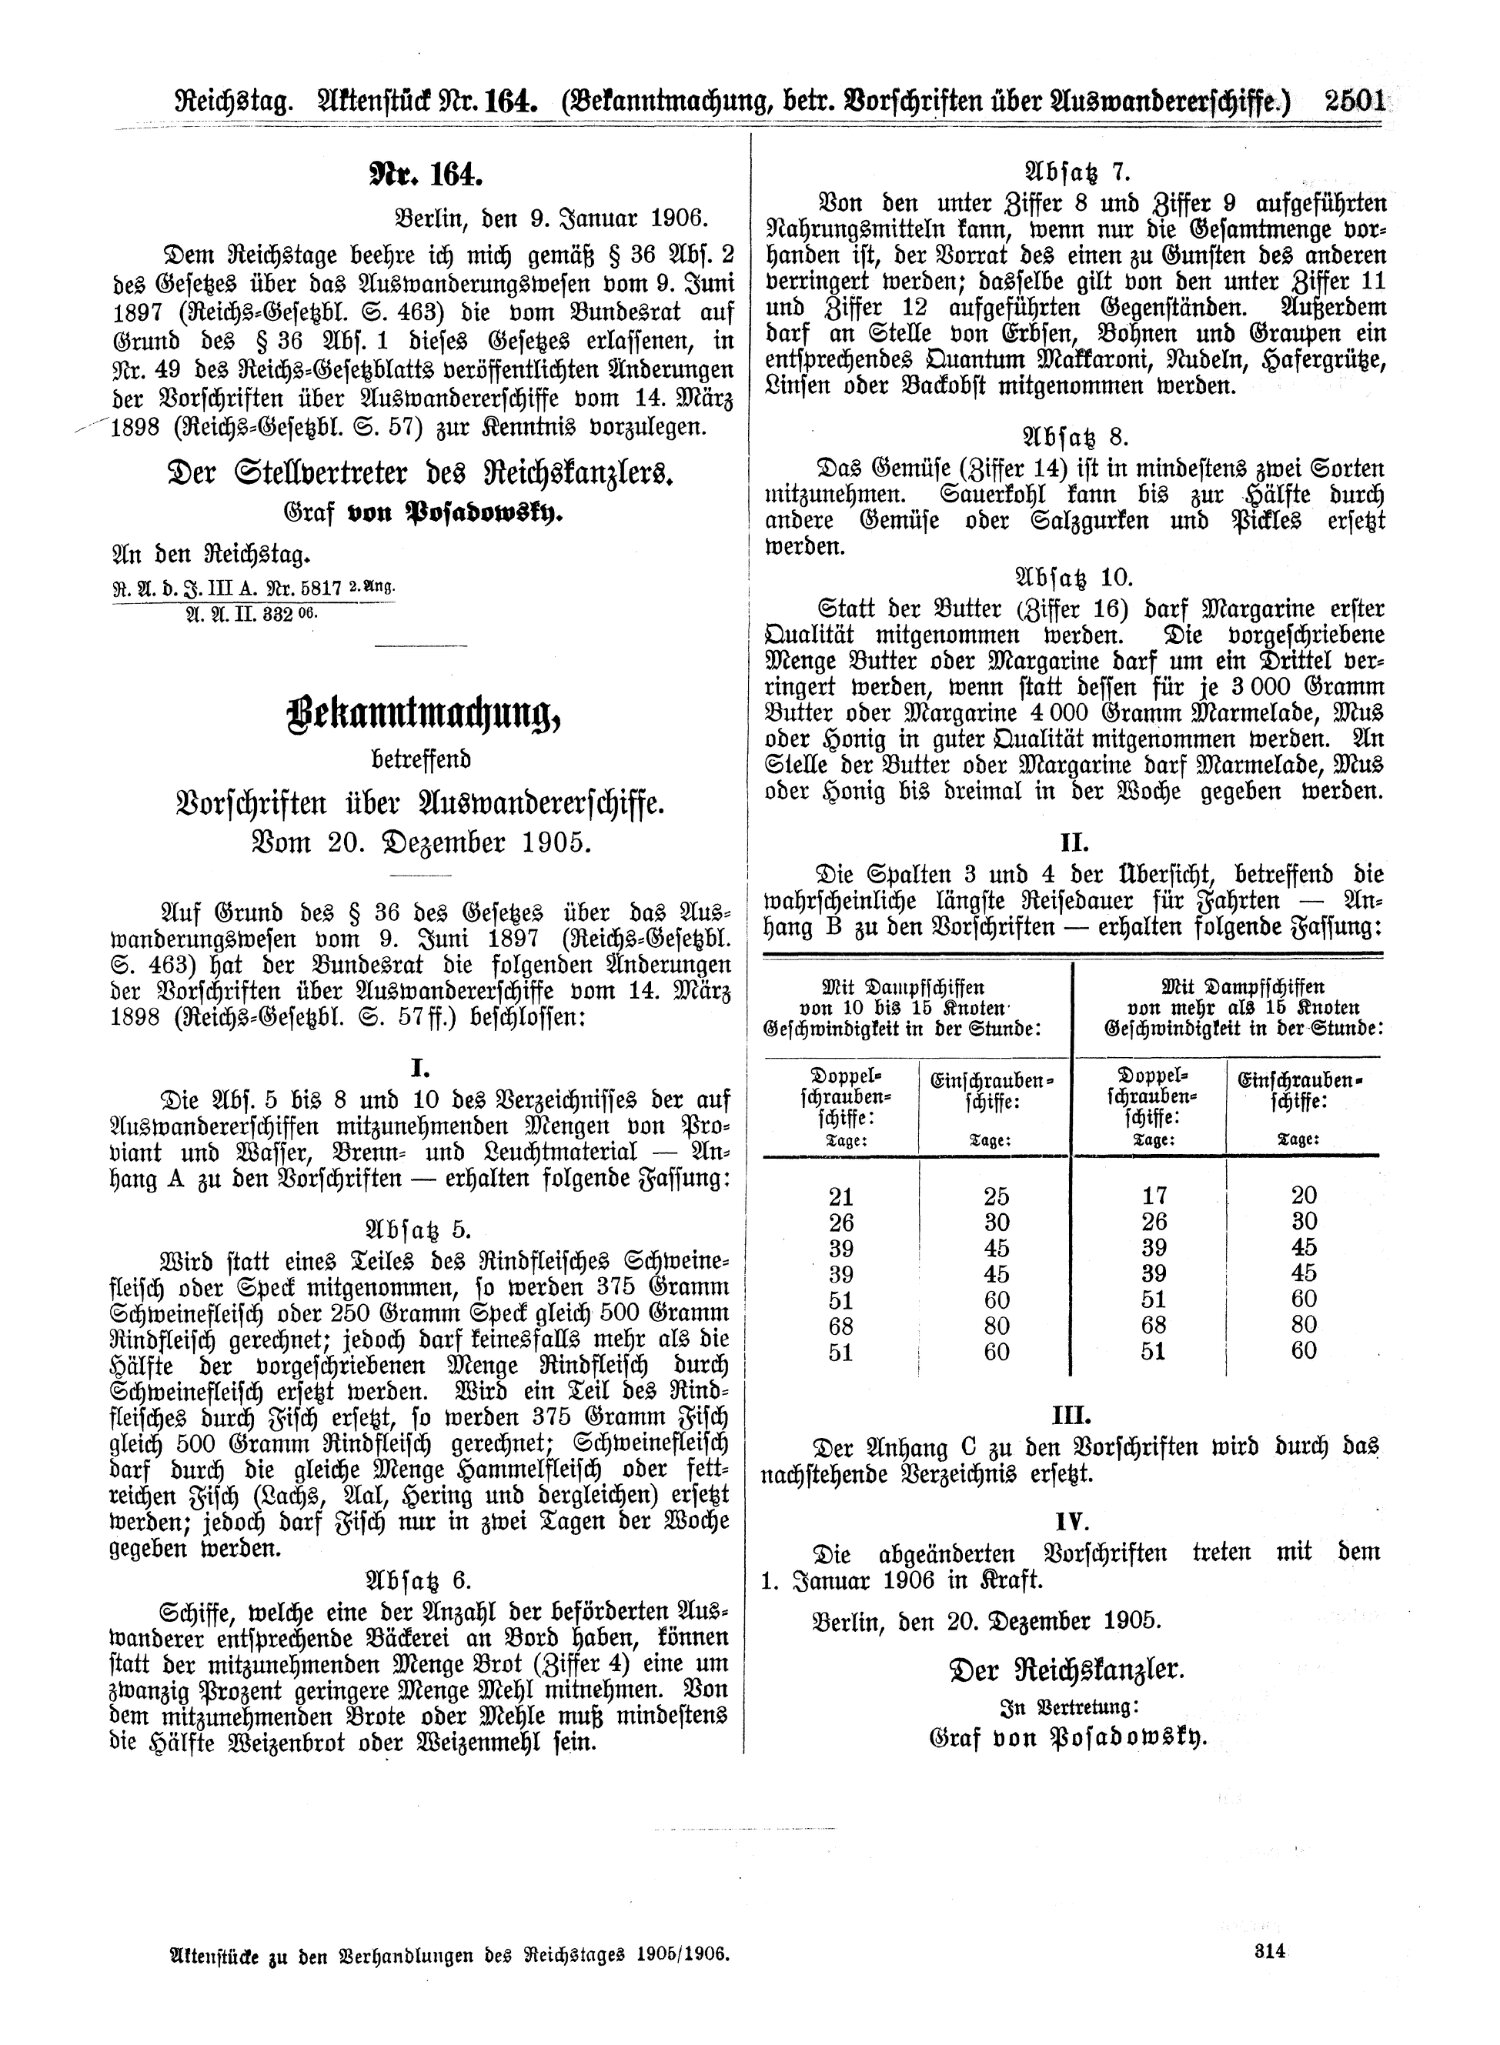 Scan of page 2501